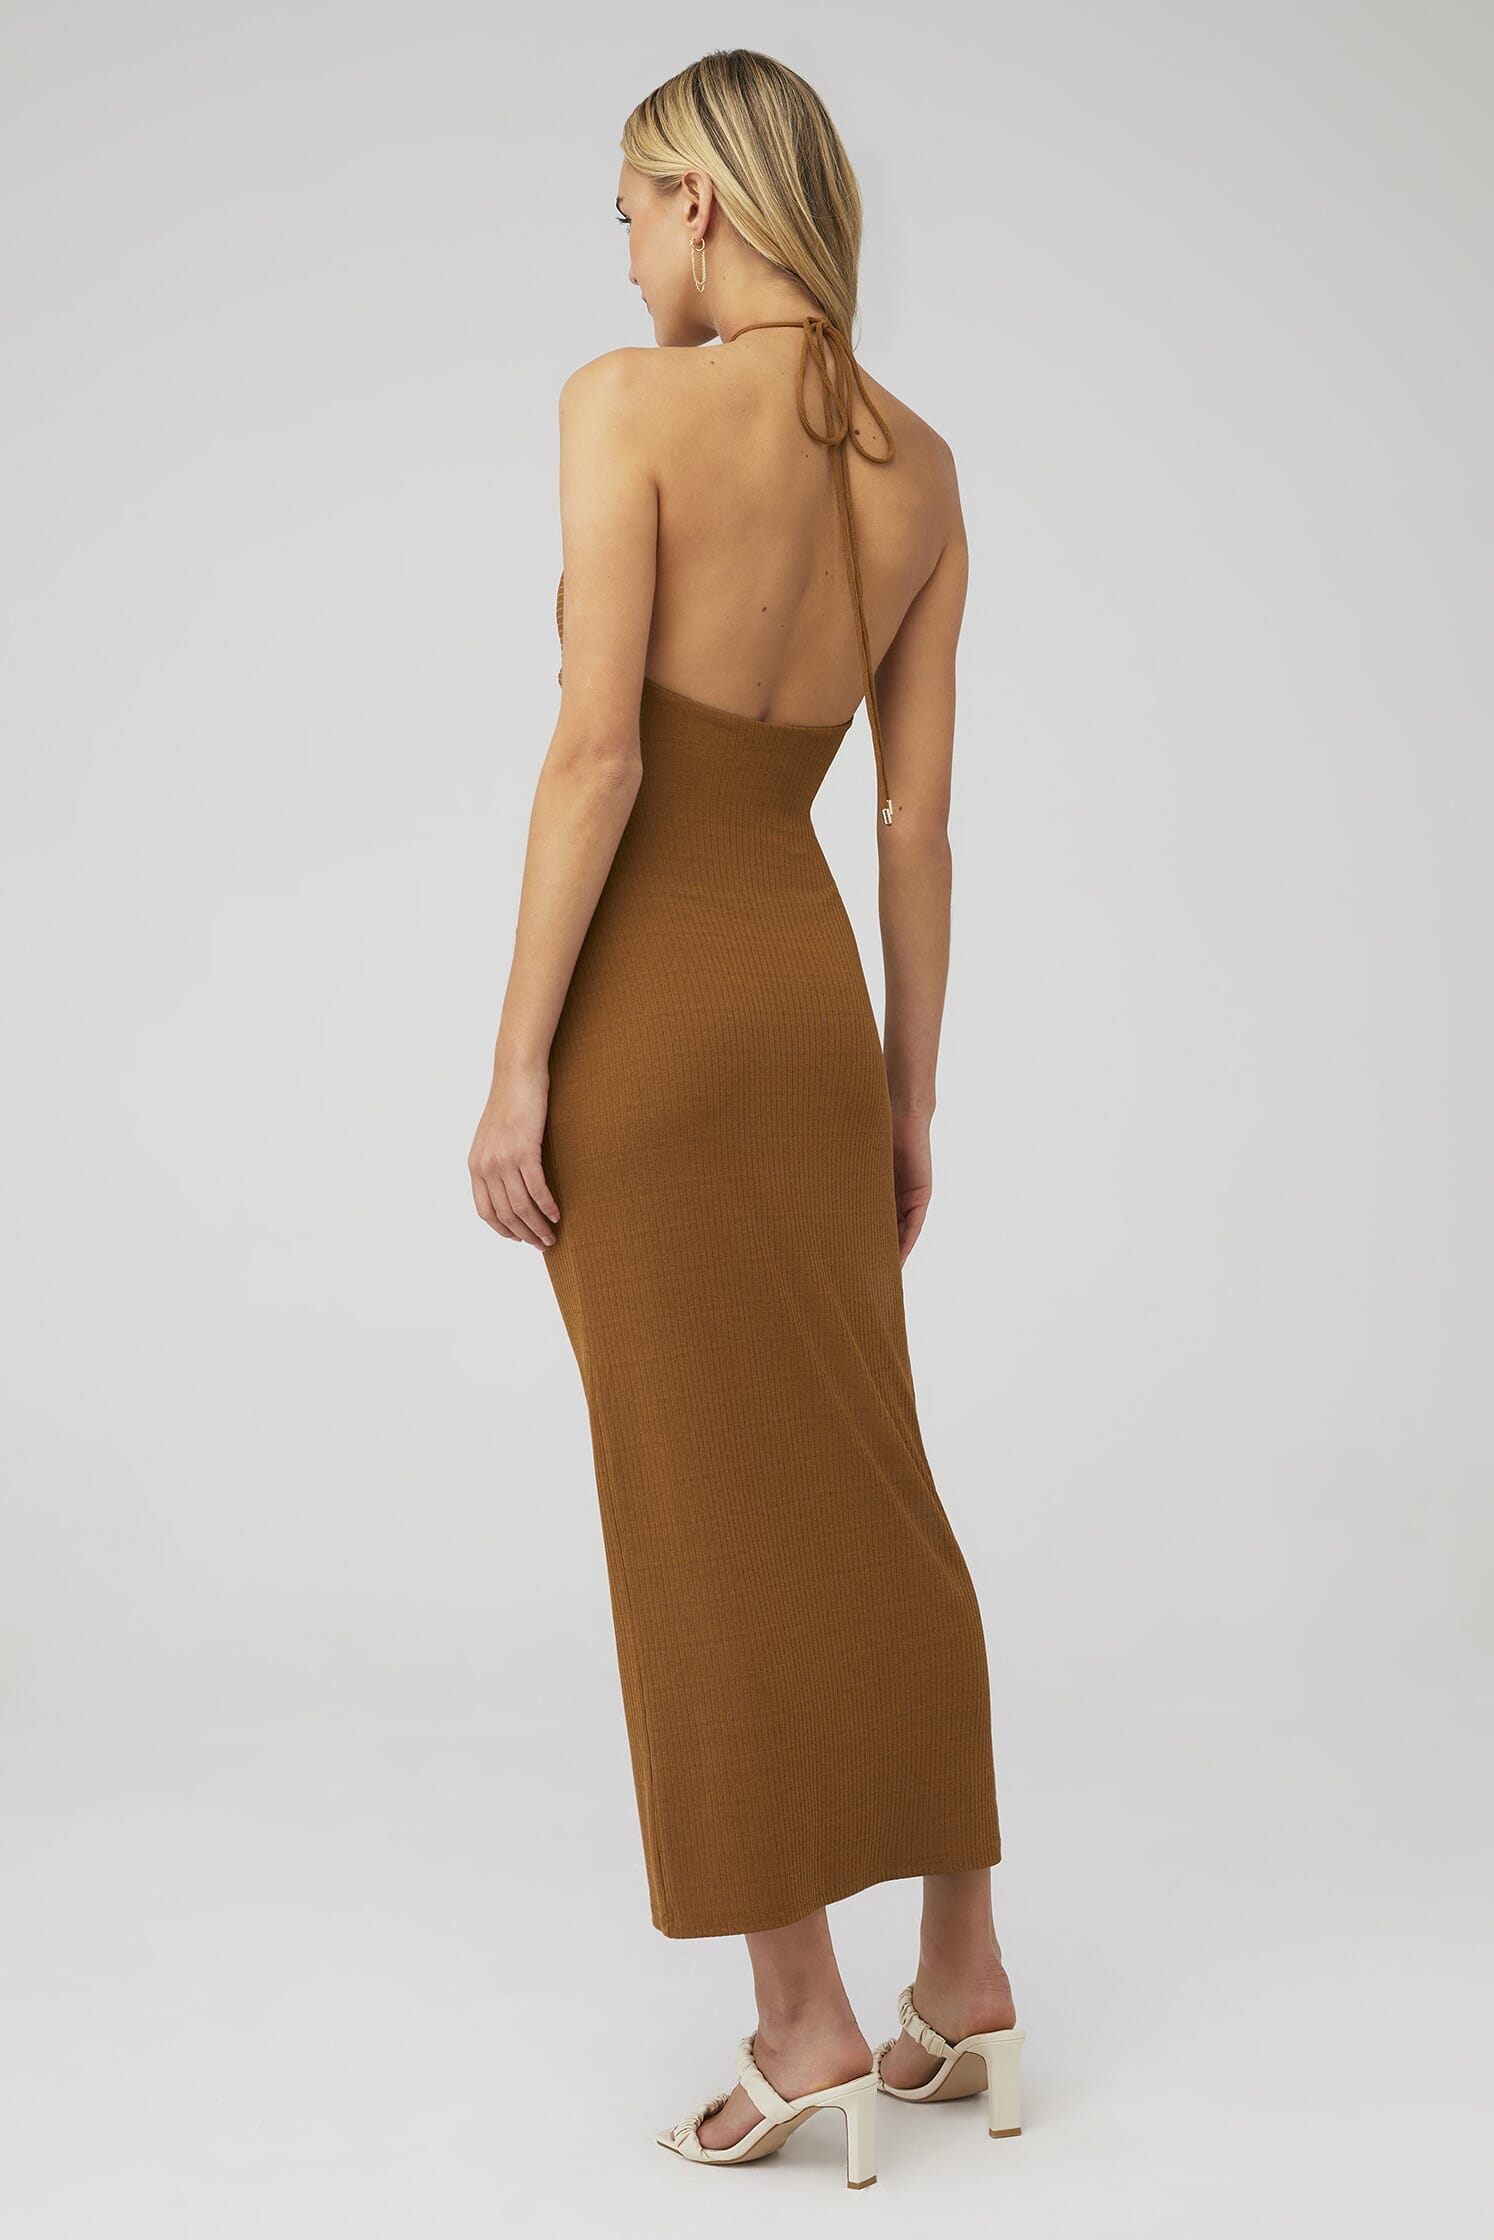 SIGNIFICANT OTHER, Hallie Dress in Toffee